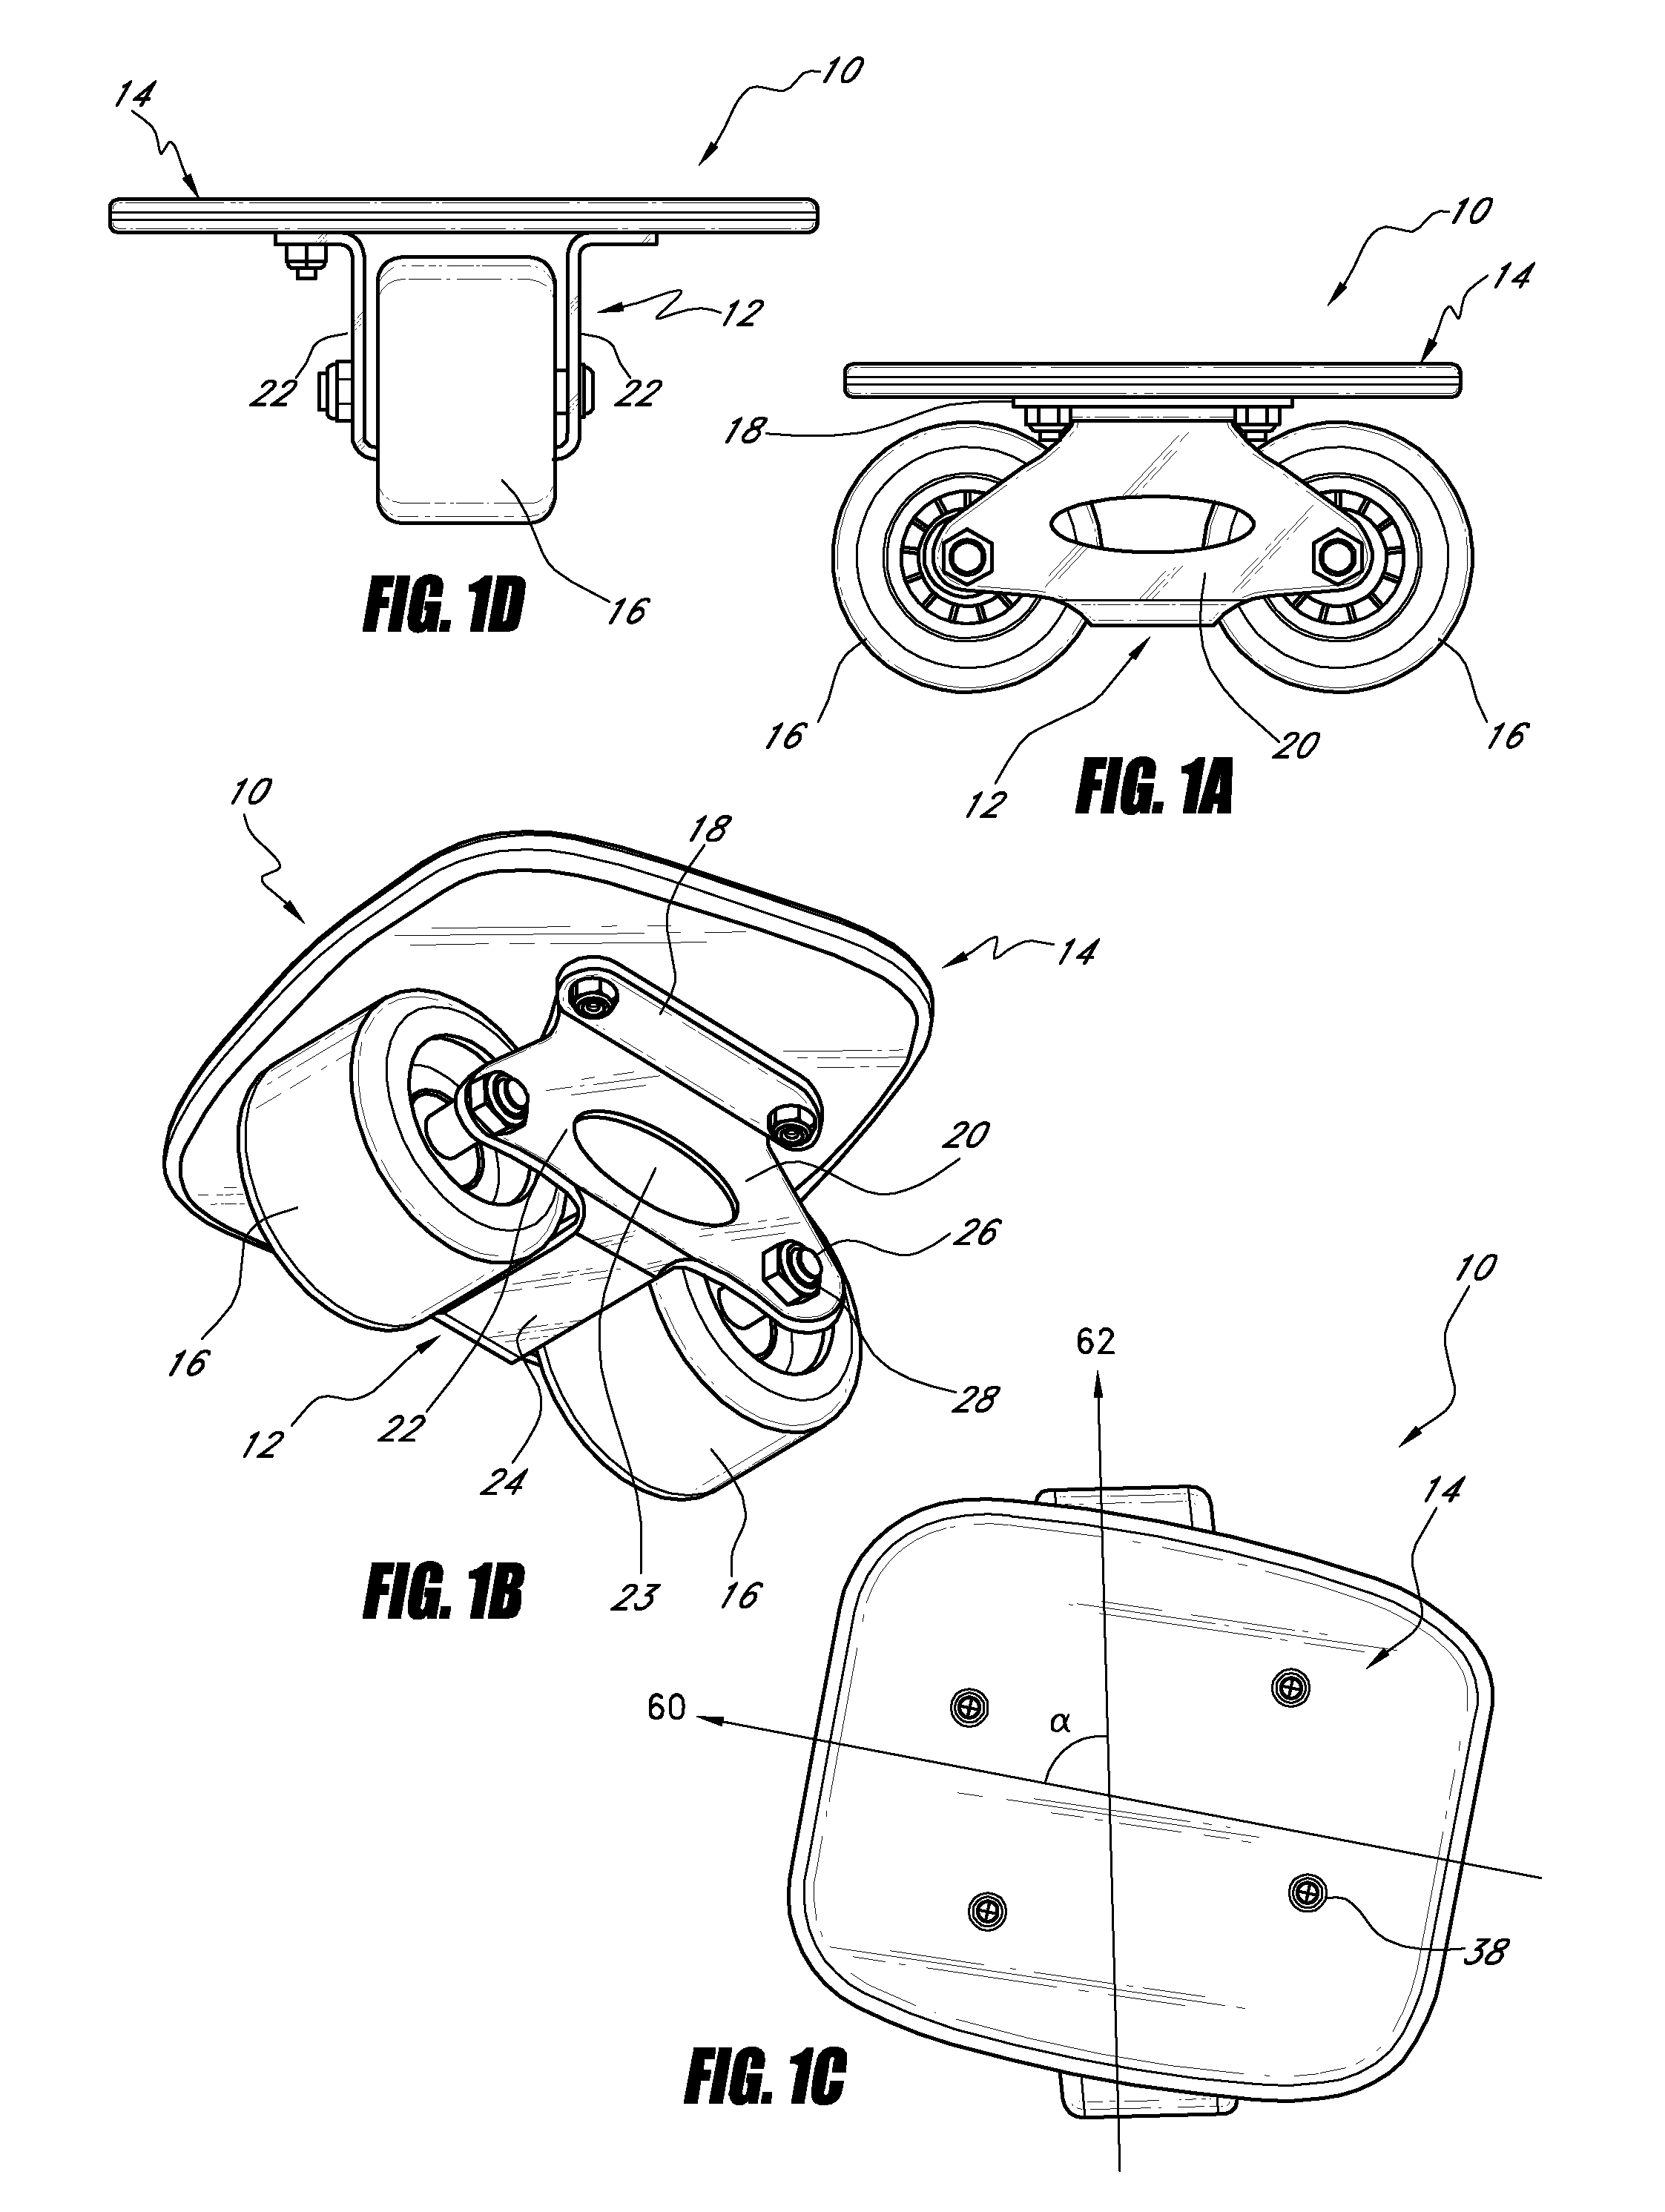 Personal transportation device for supporting a user's foot